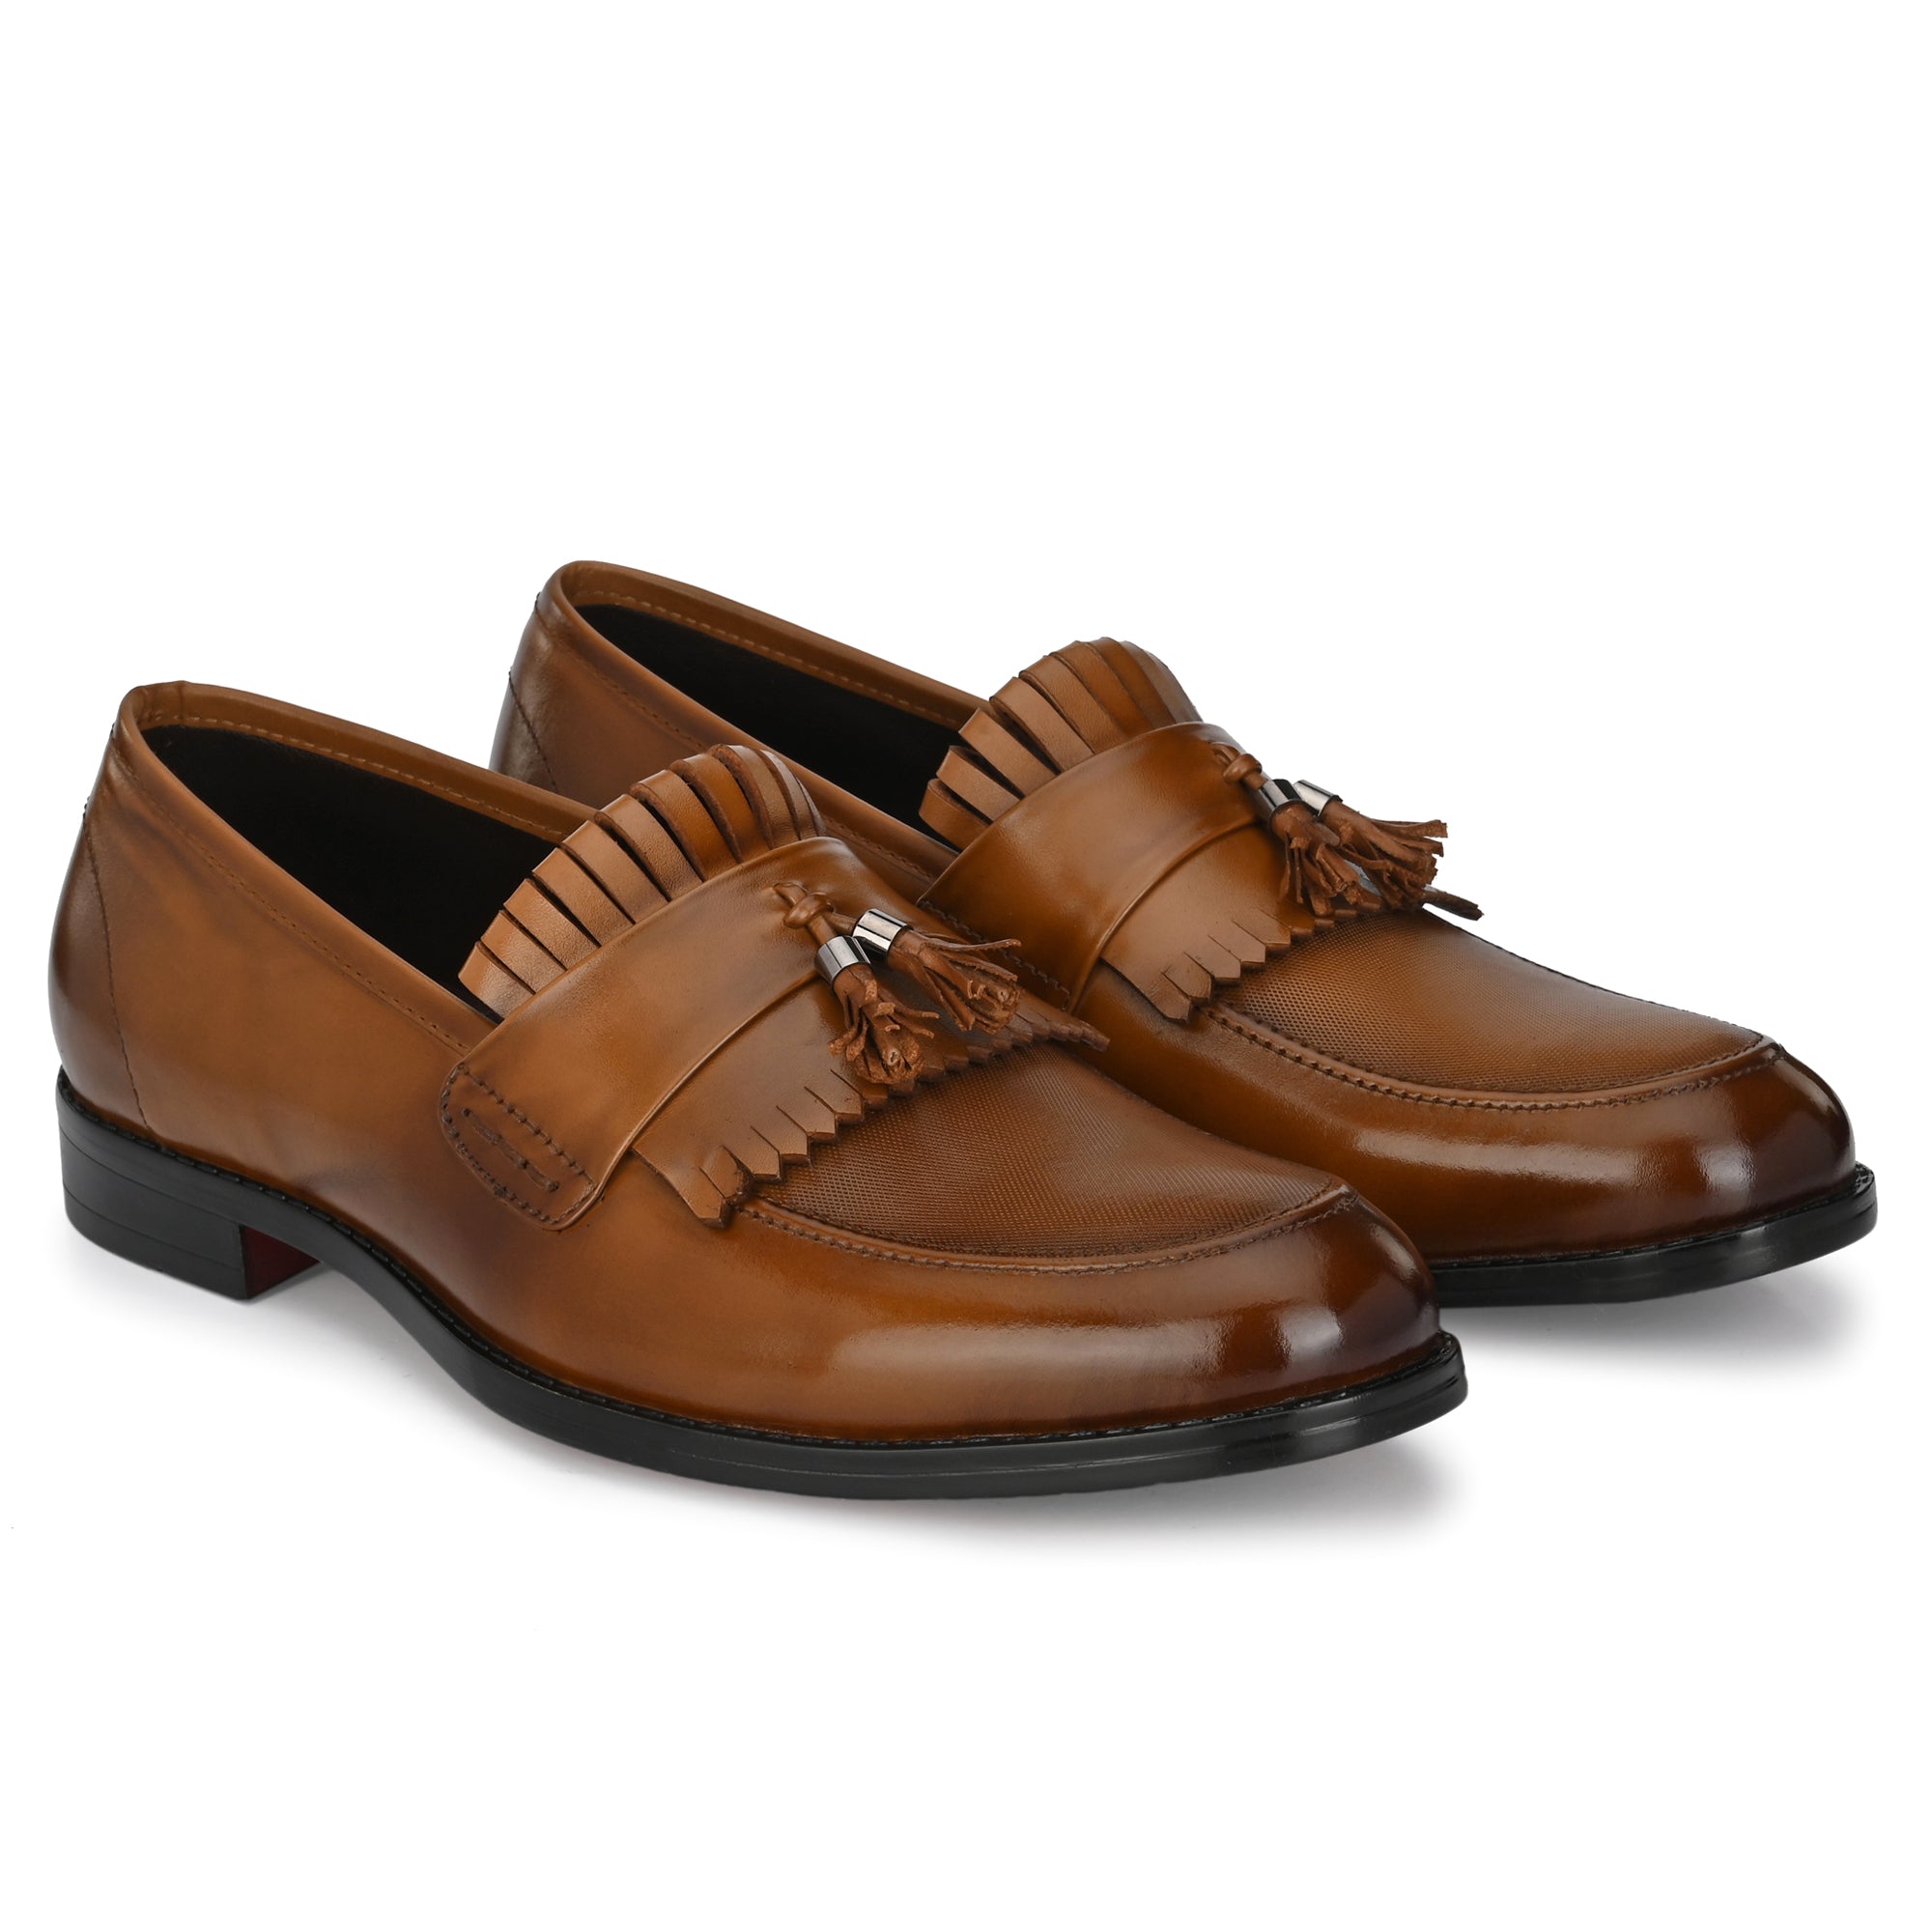 Tassled Formal Penny Loafers For Men with Textured Top